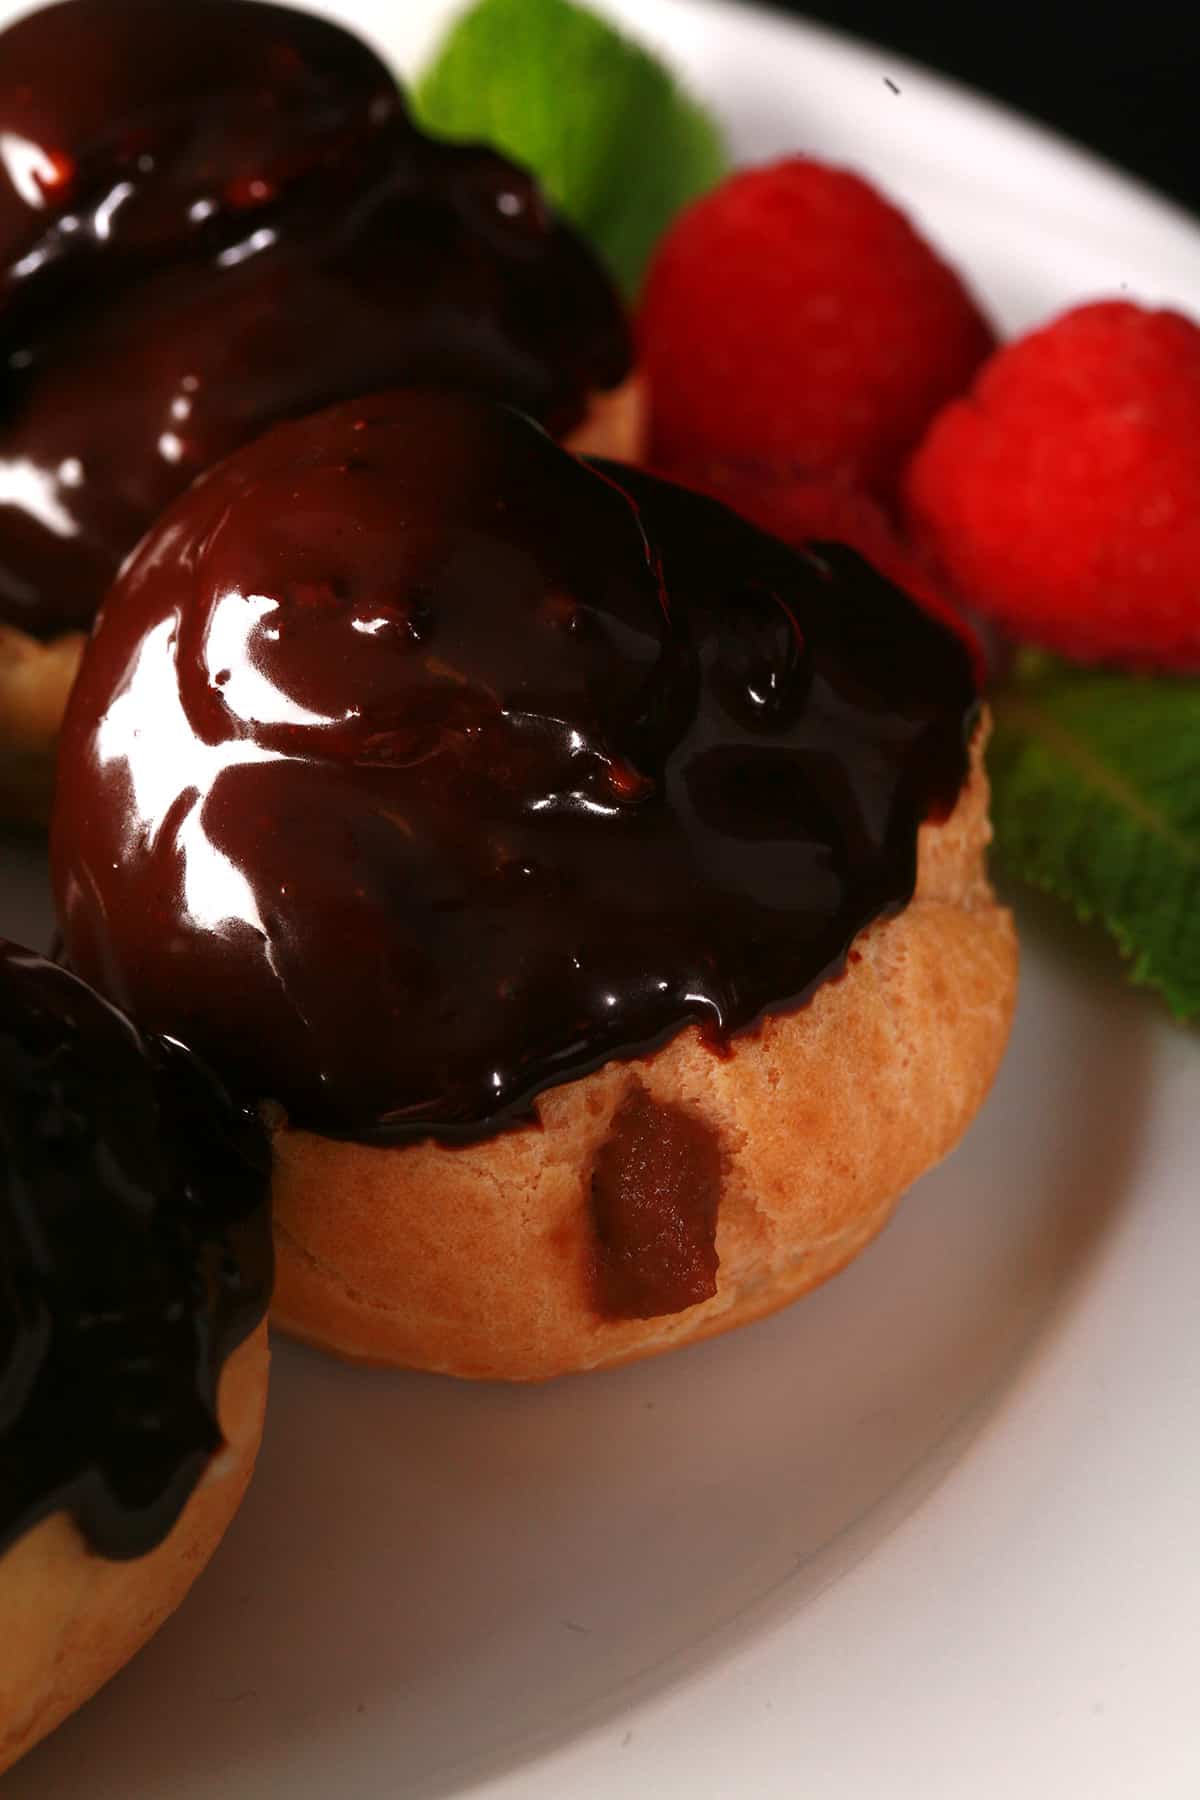 Several chocolate dipped profiteroles on a plate.